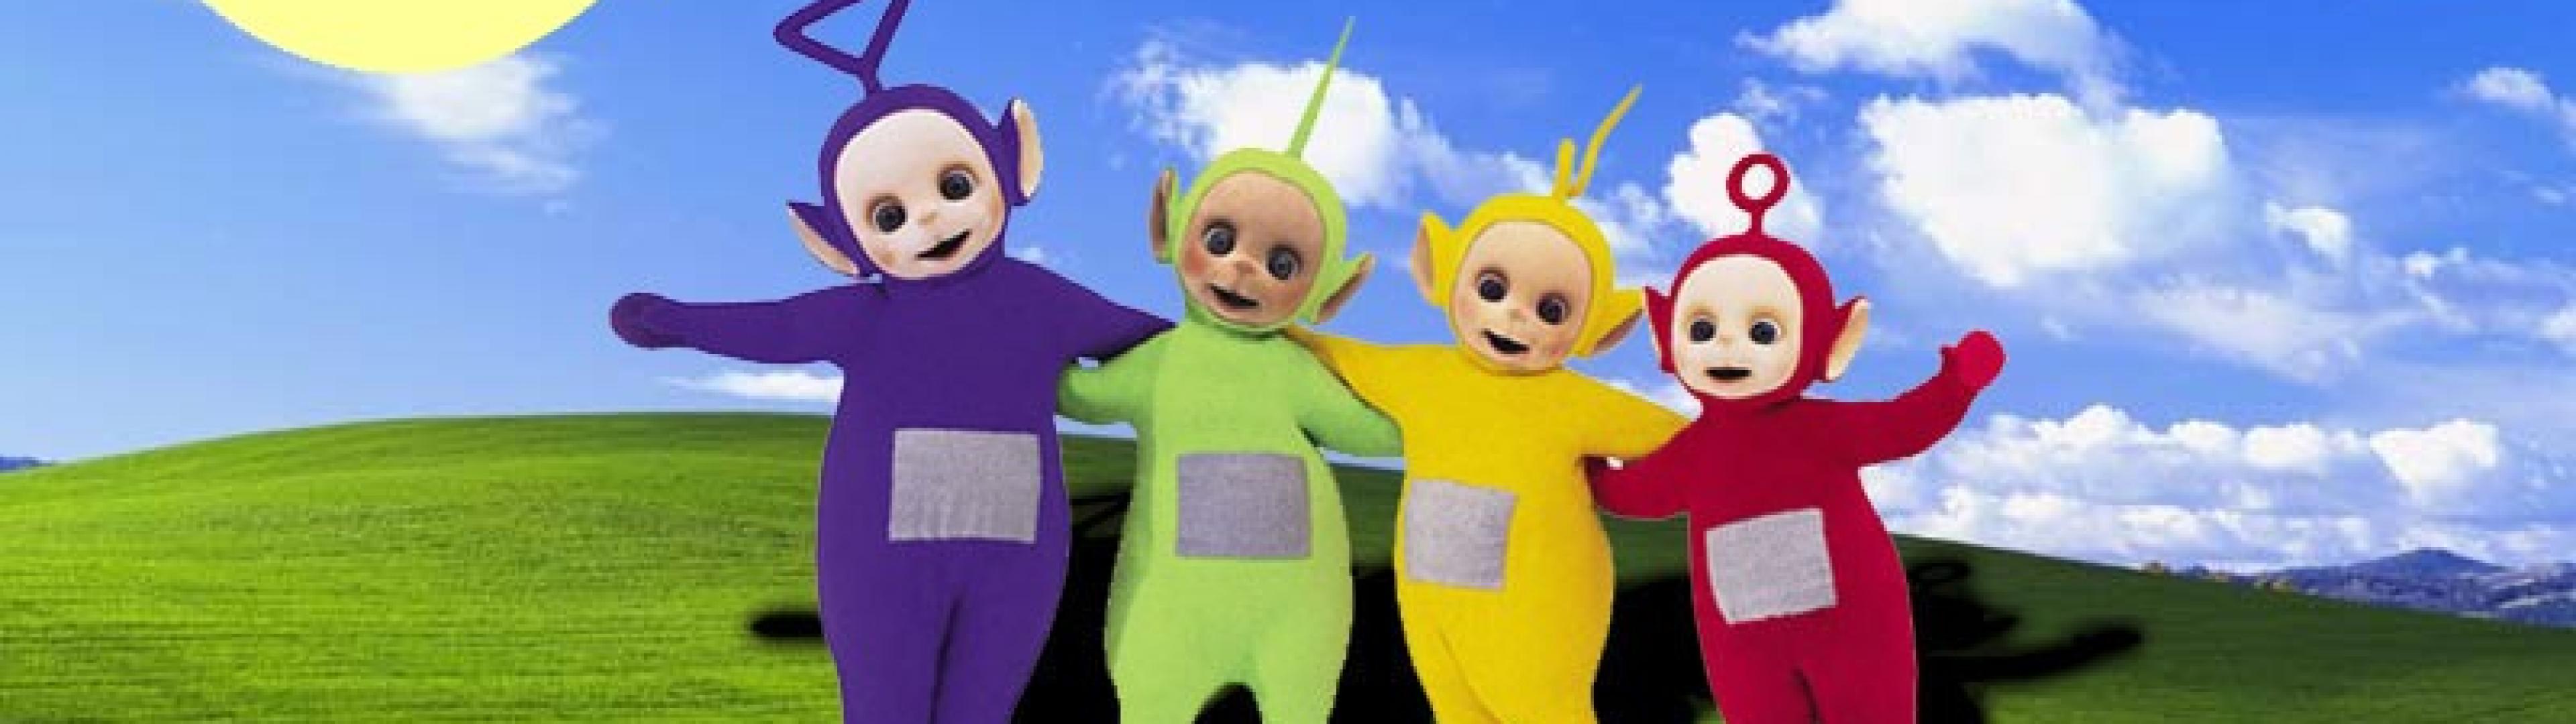 Teletubby Wallpapers